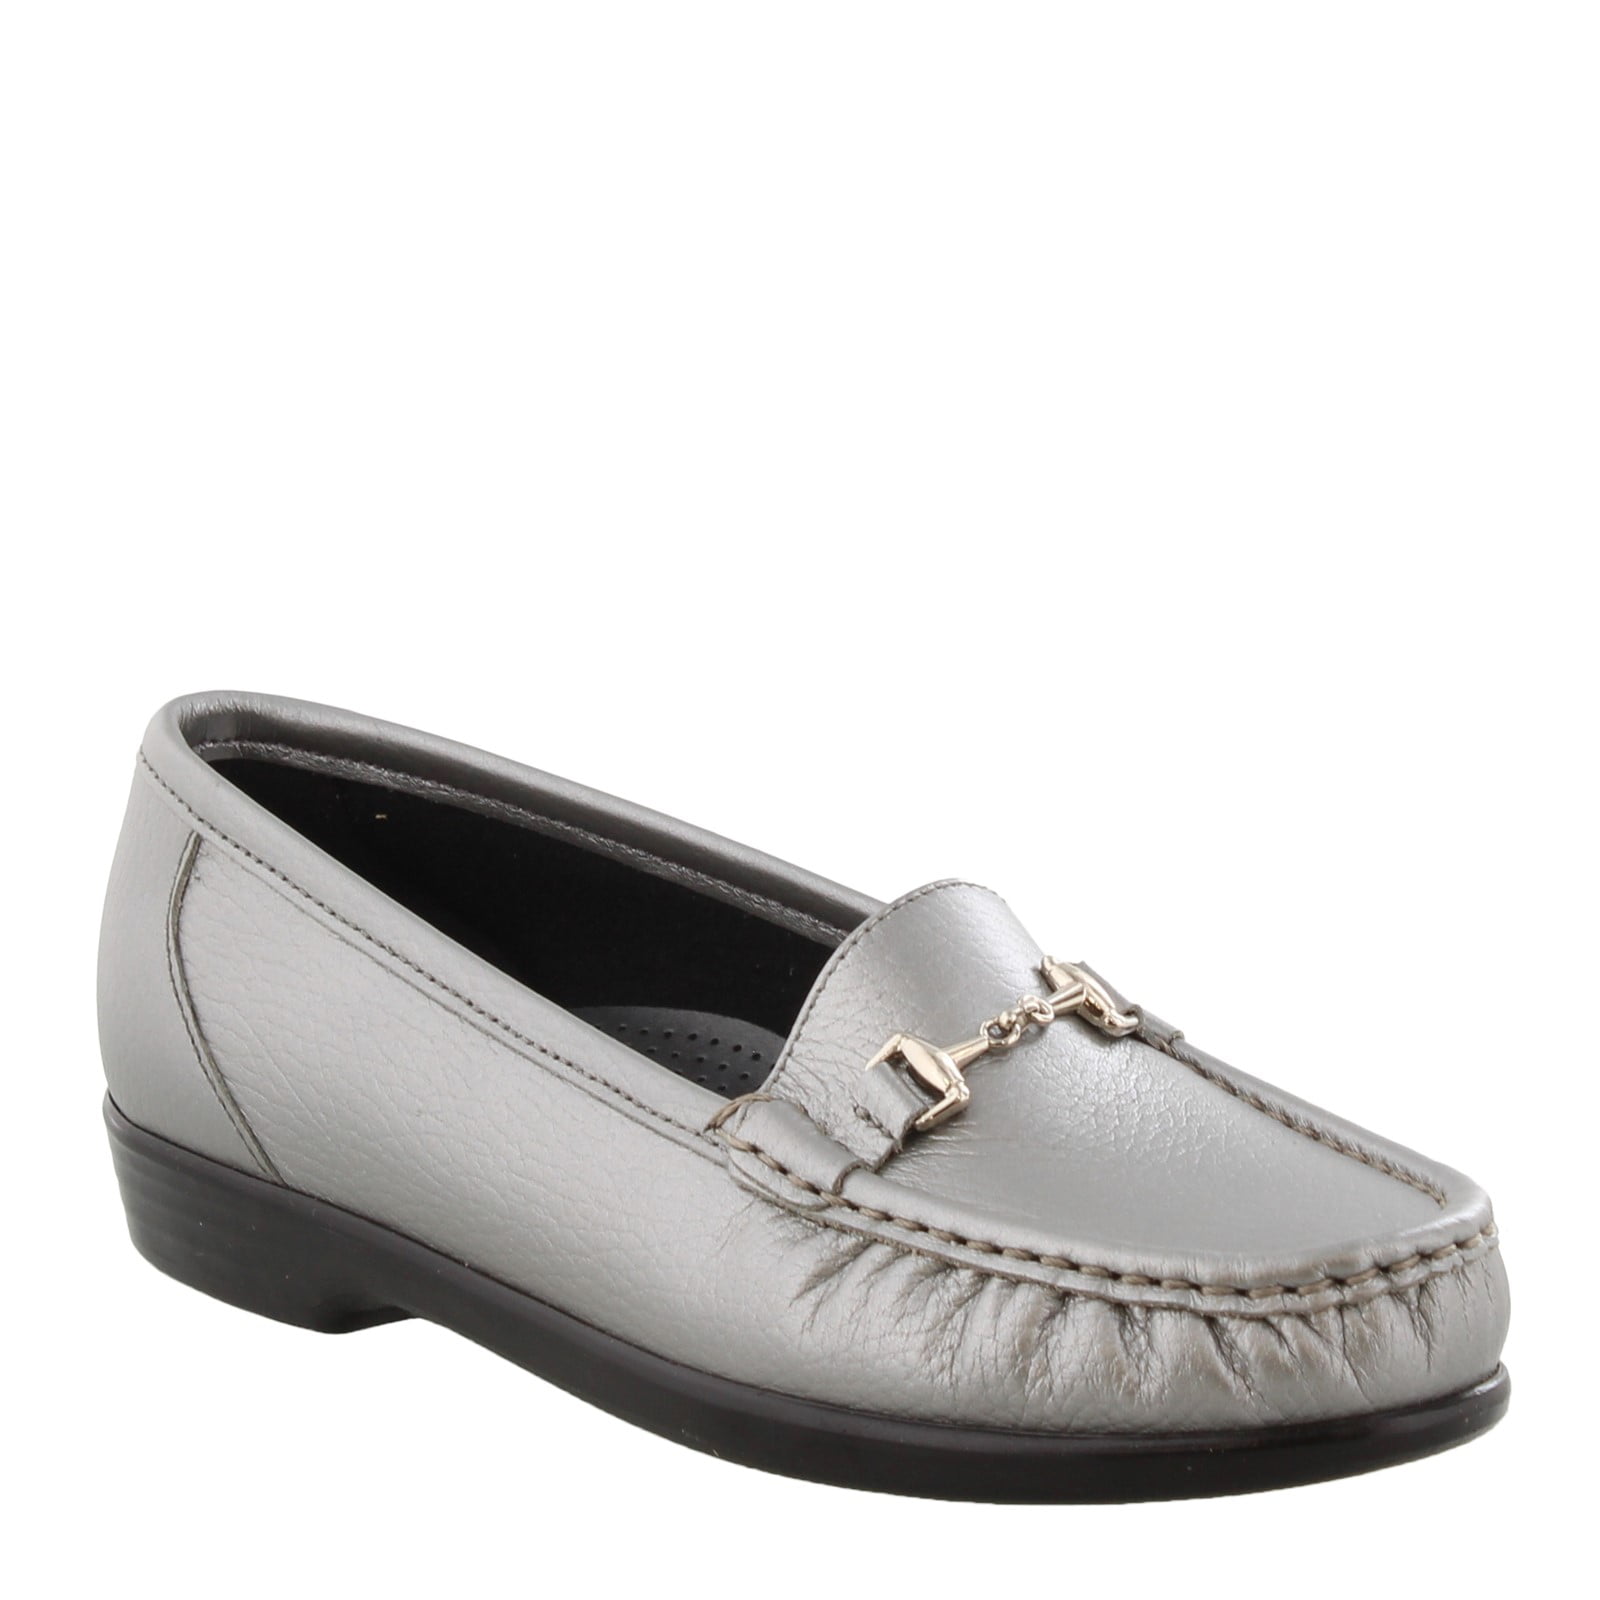 metro loafer shoes online